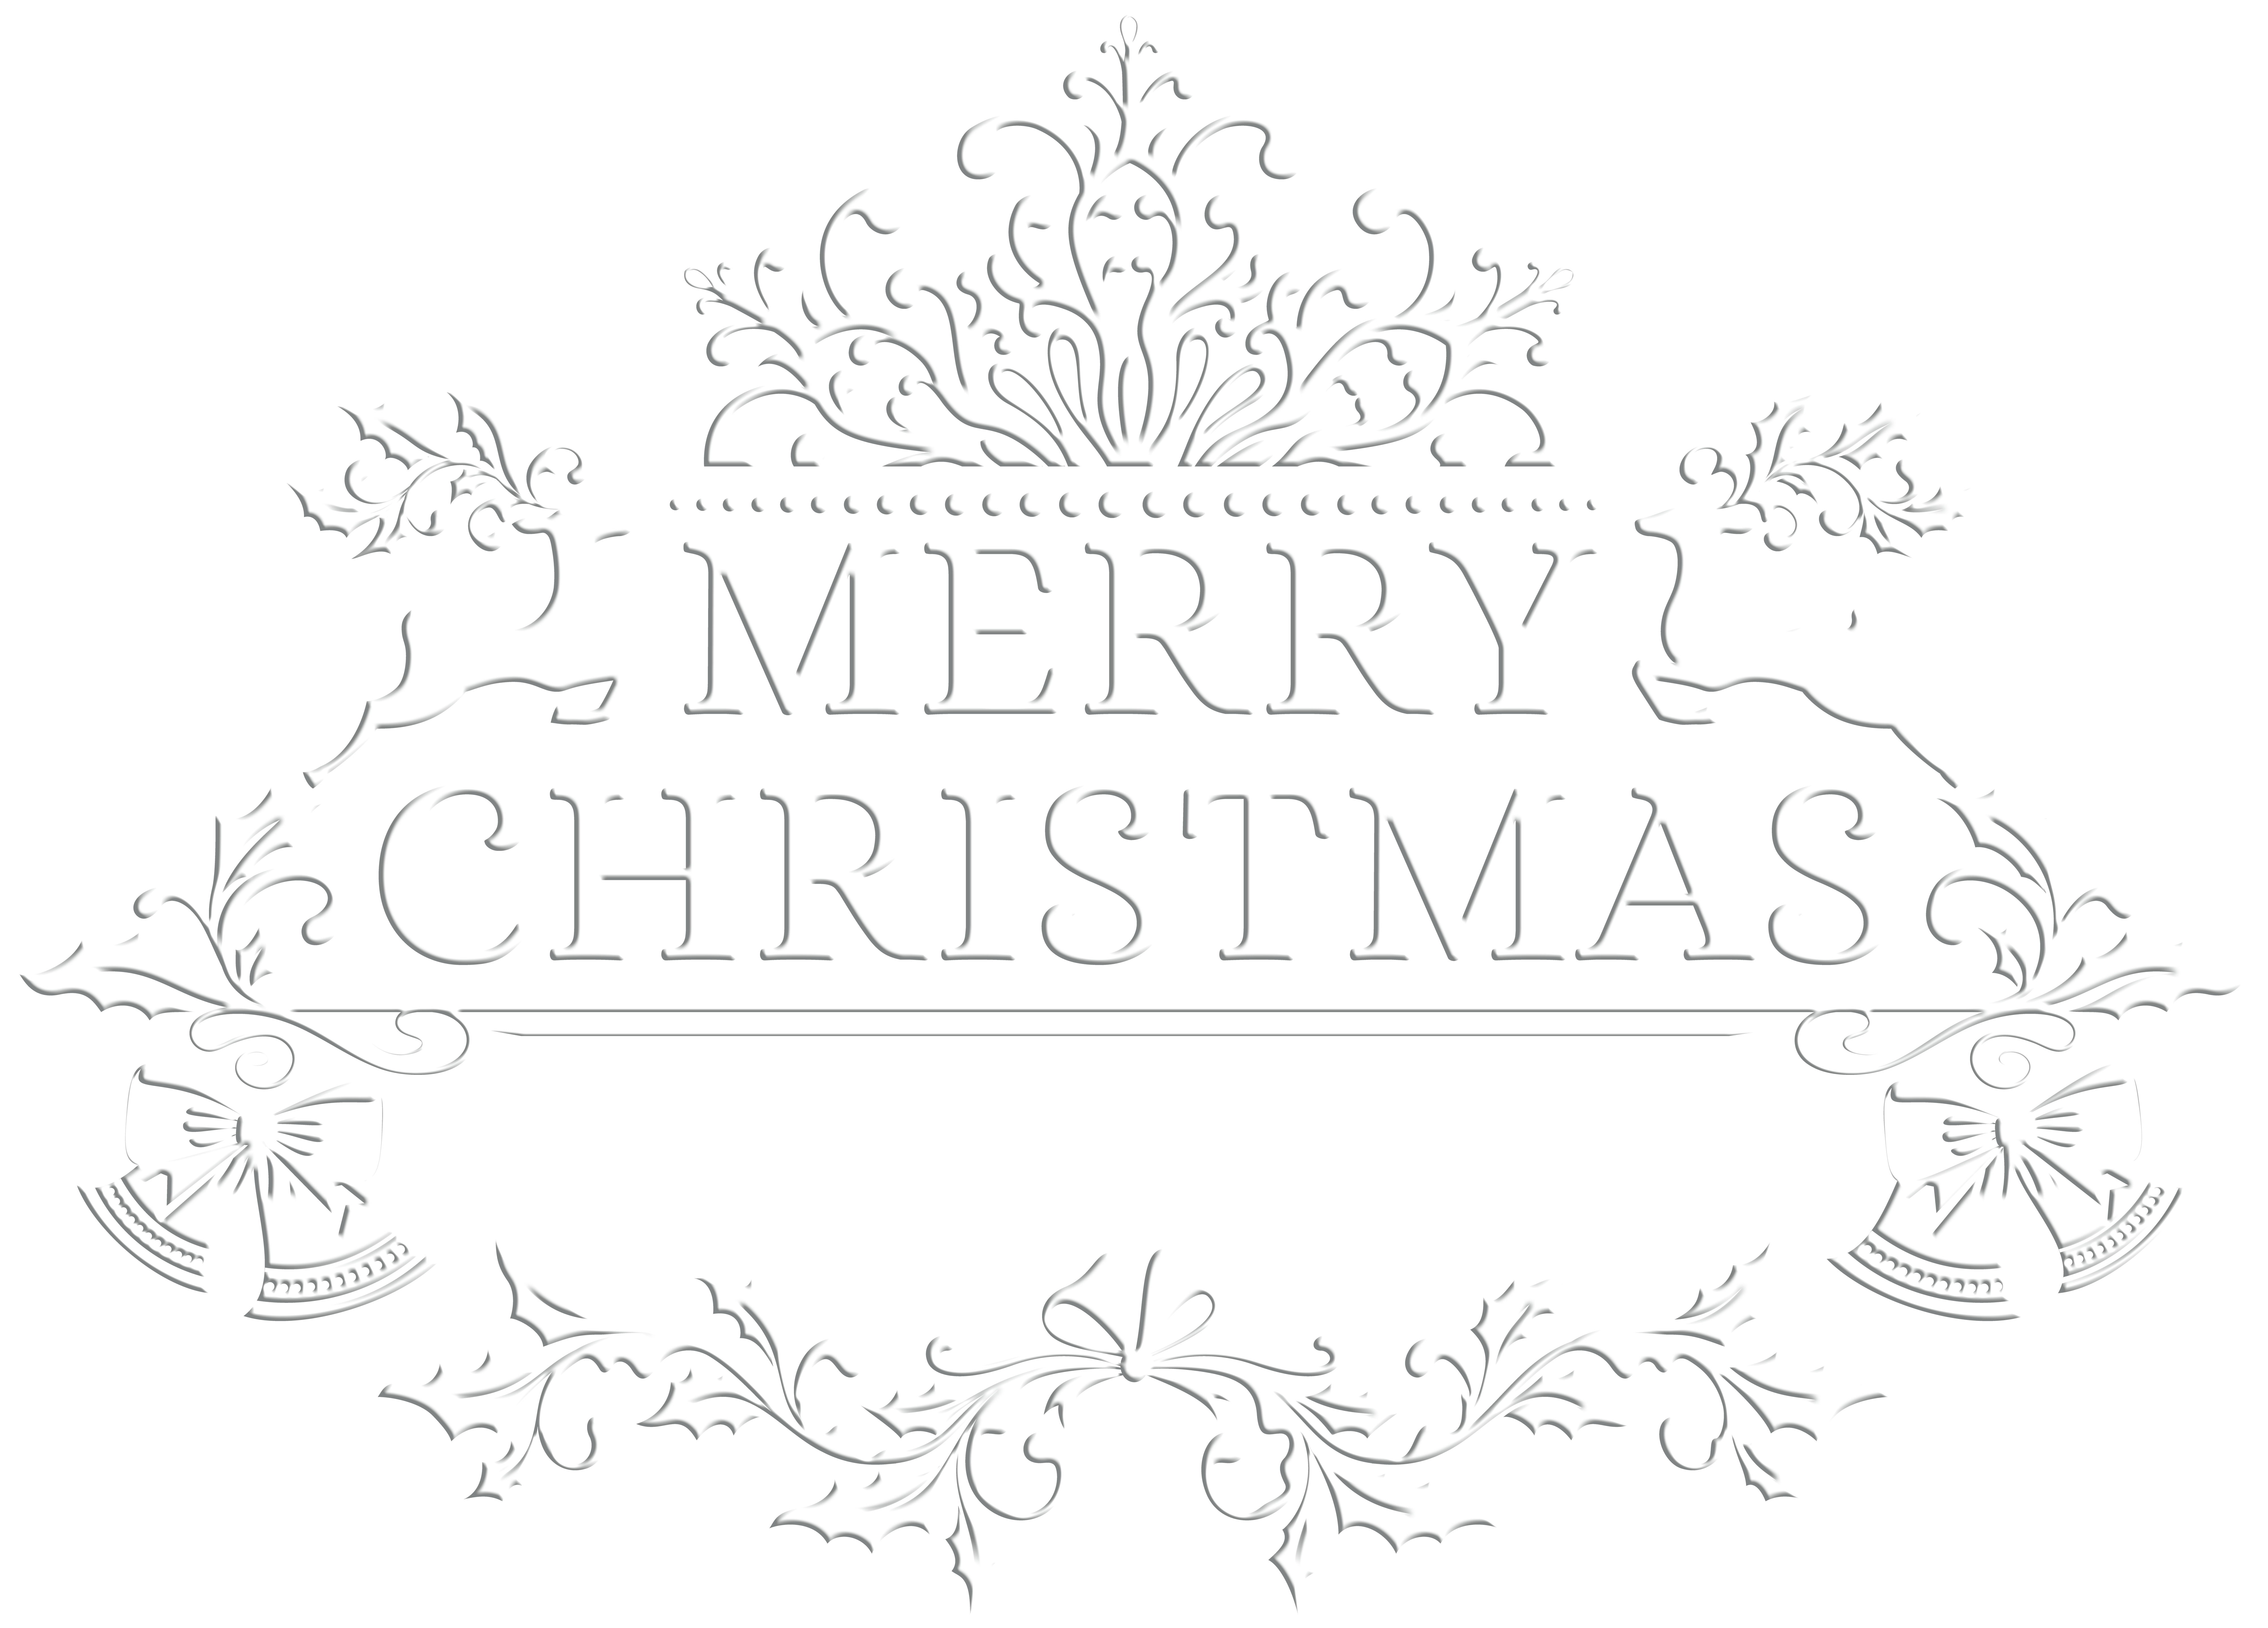 Merry Christmas White Transparent PNG Clip Art Image | Gallery Yopriceville - High-Quality ...